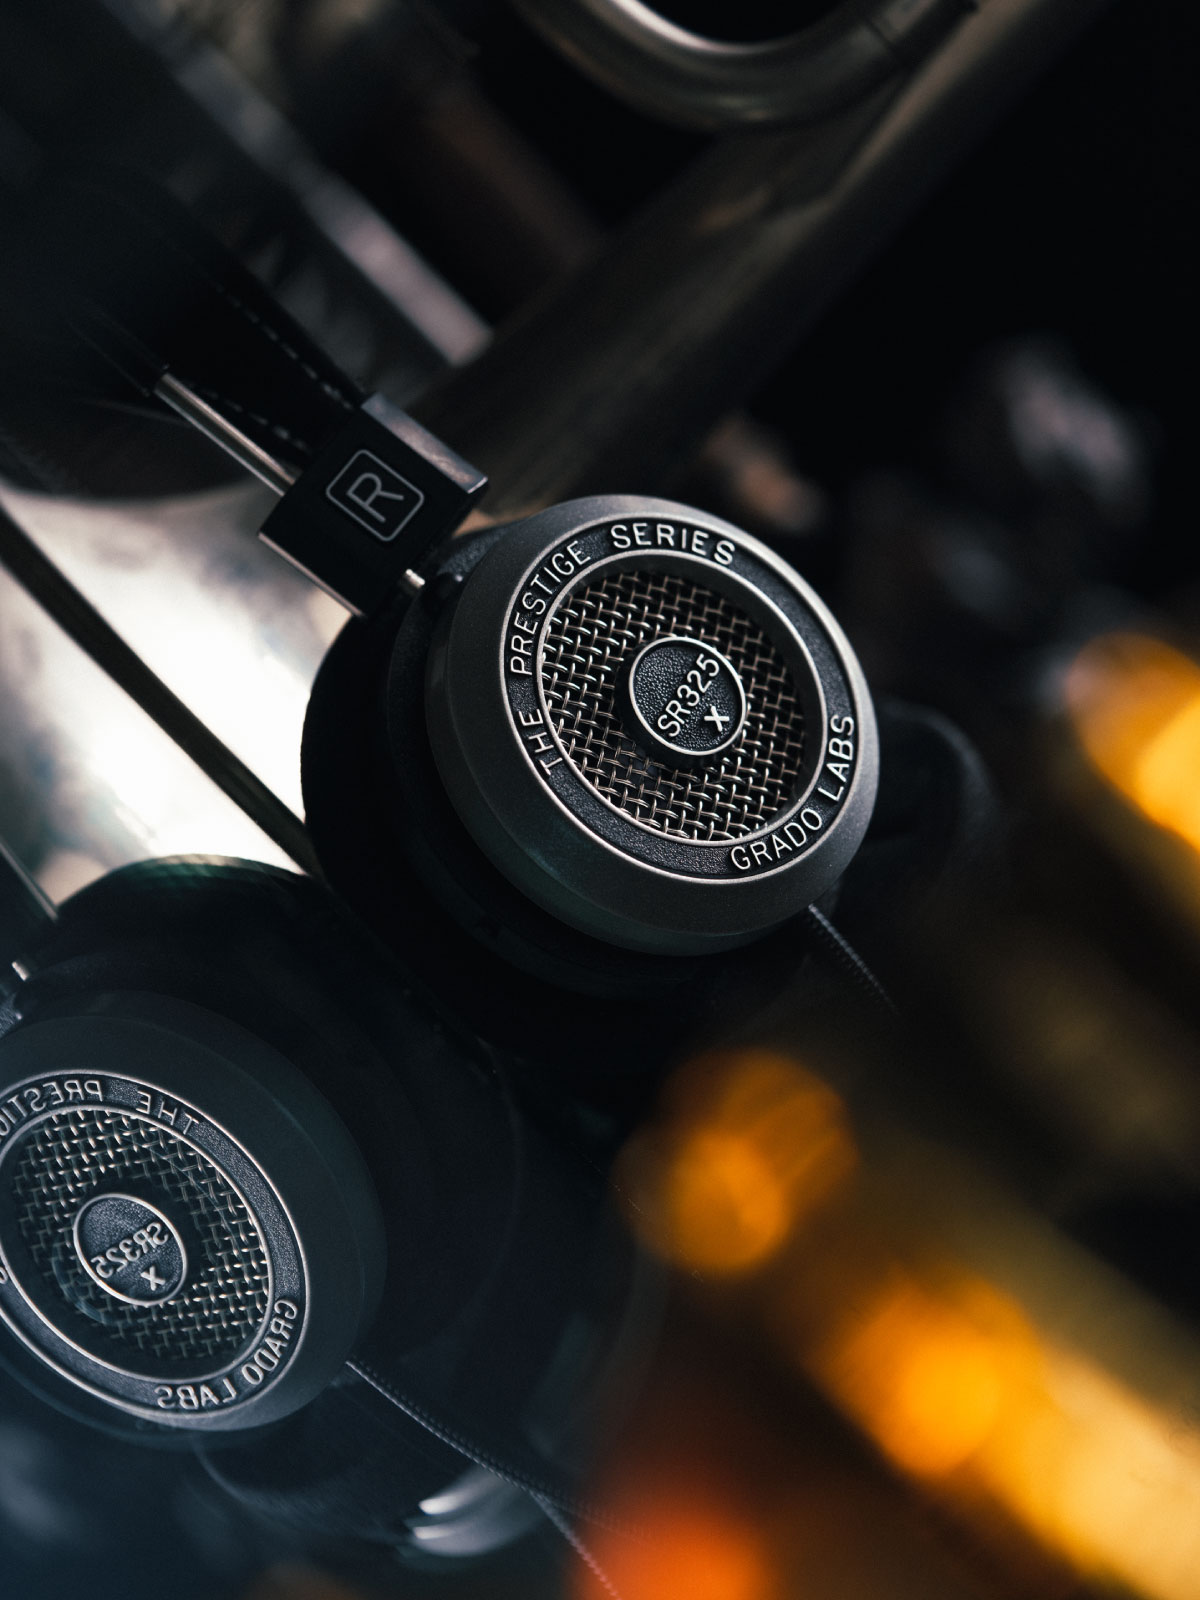 Photo of SR325x headphones with a blurred background.